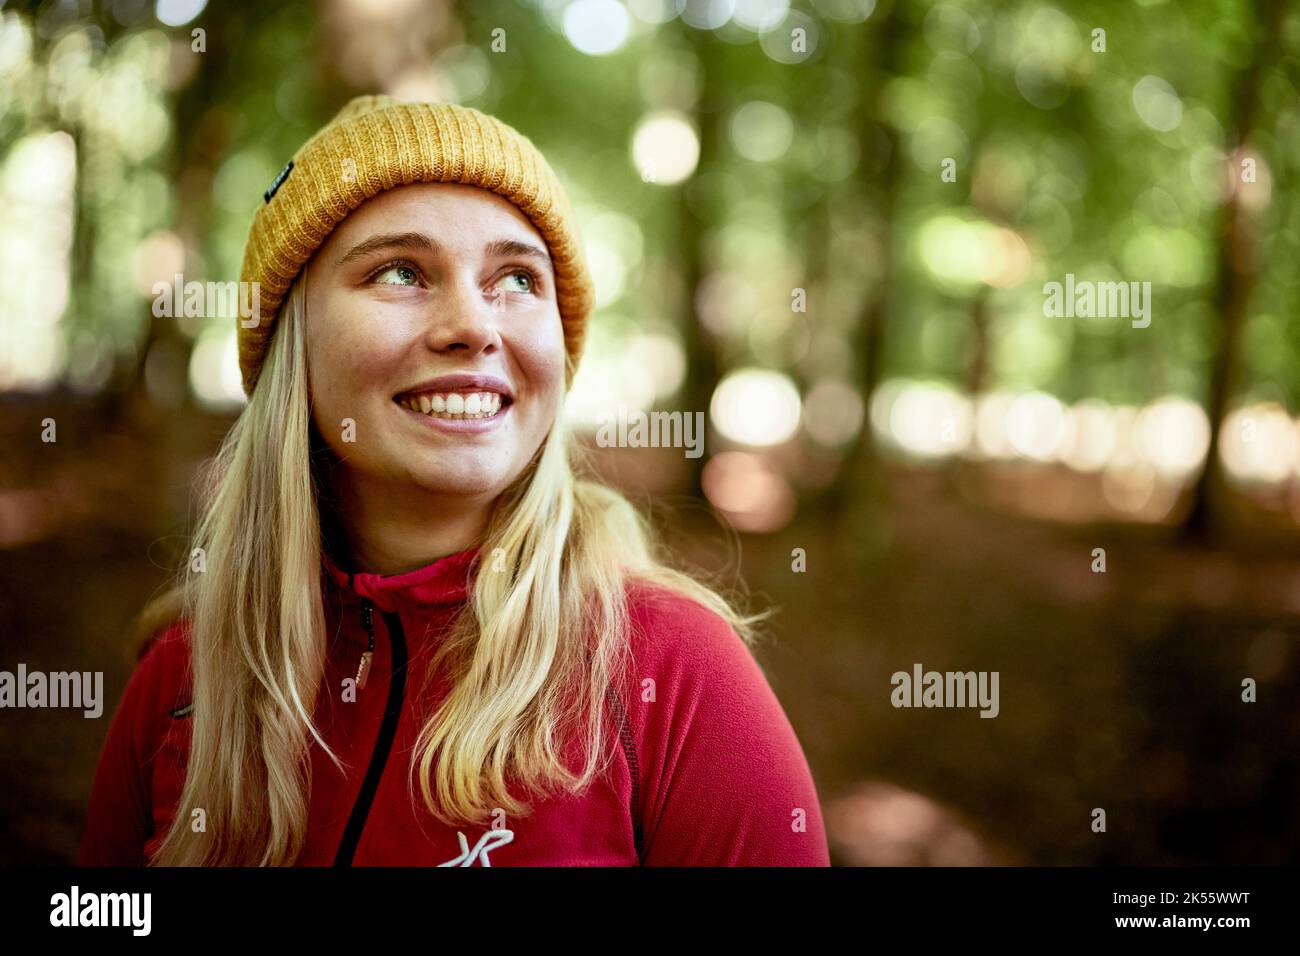 Young woman in red jacket walking in forest Stock Photo